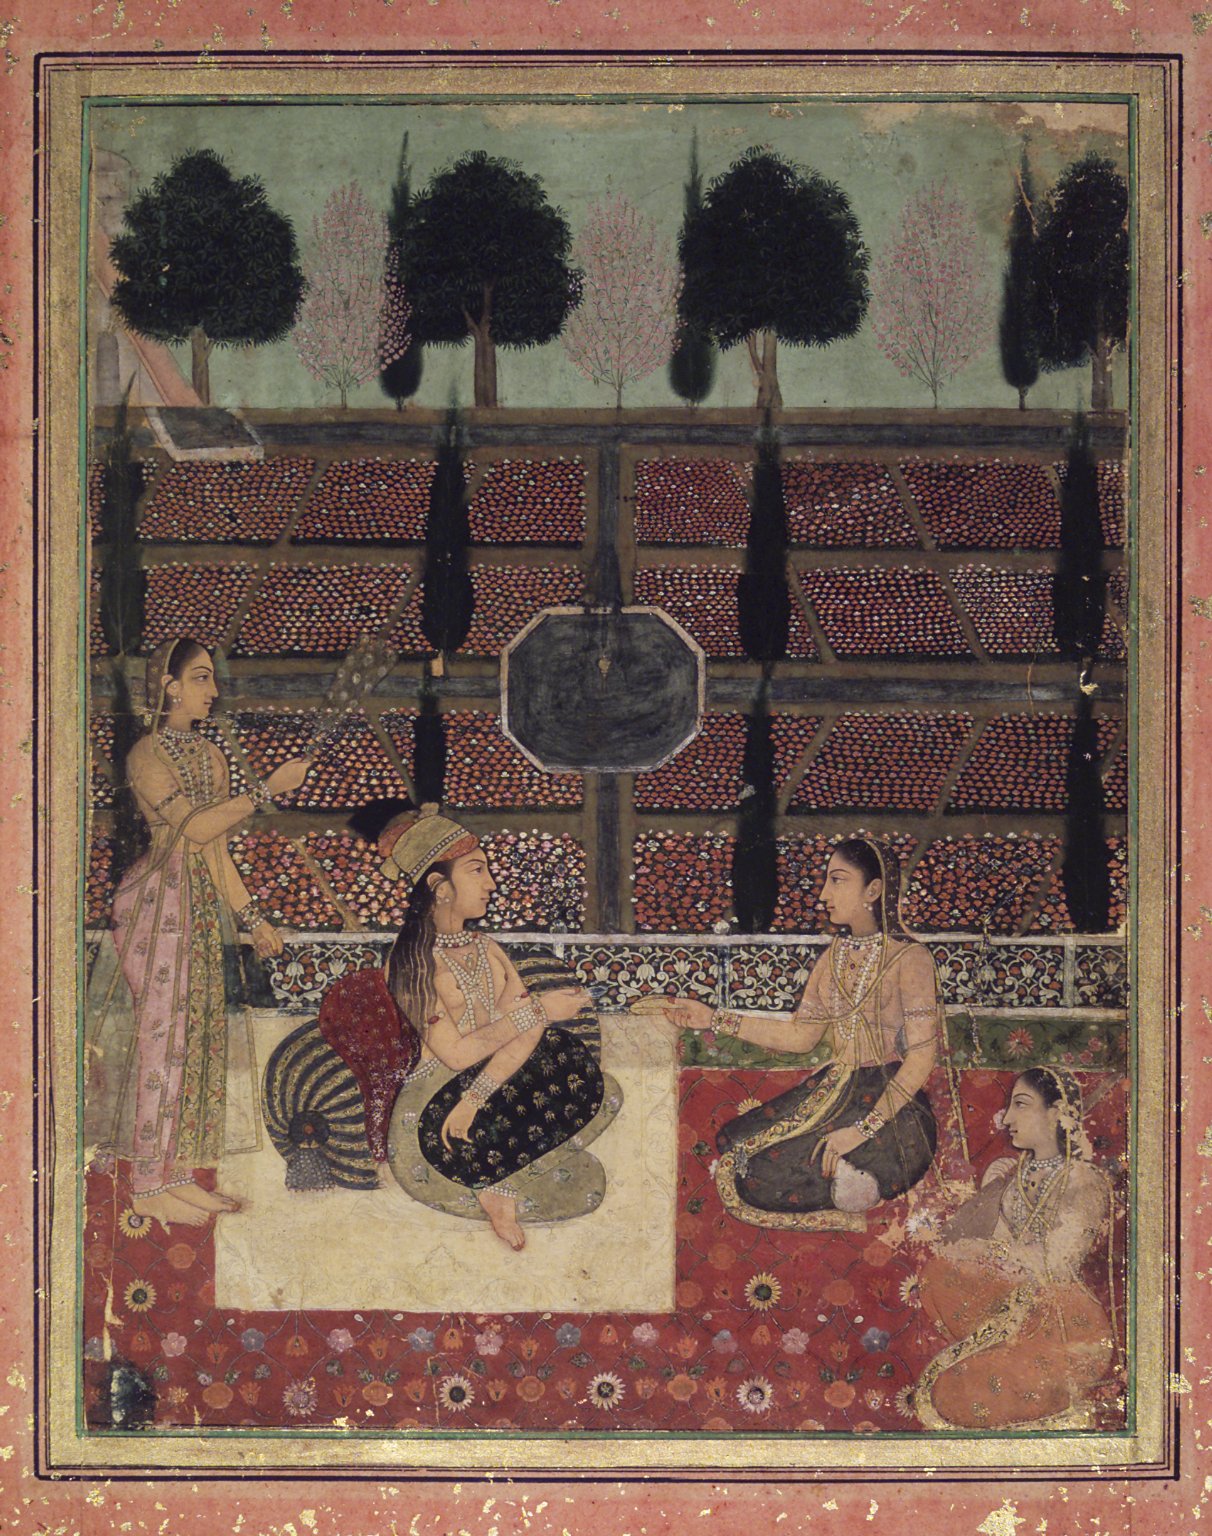 A Hindu lady and Three of her Attendants are on a Terrace - Mughal Painting Circa 1700-1710